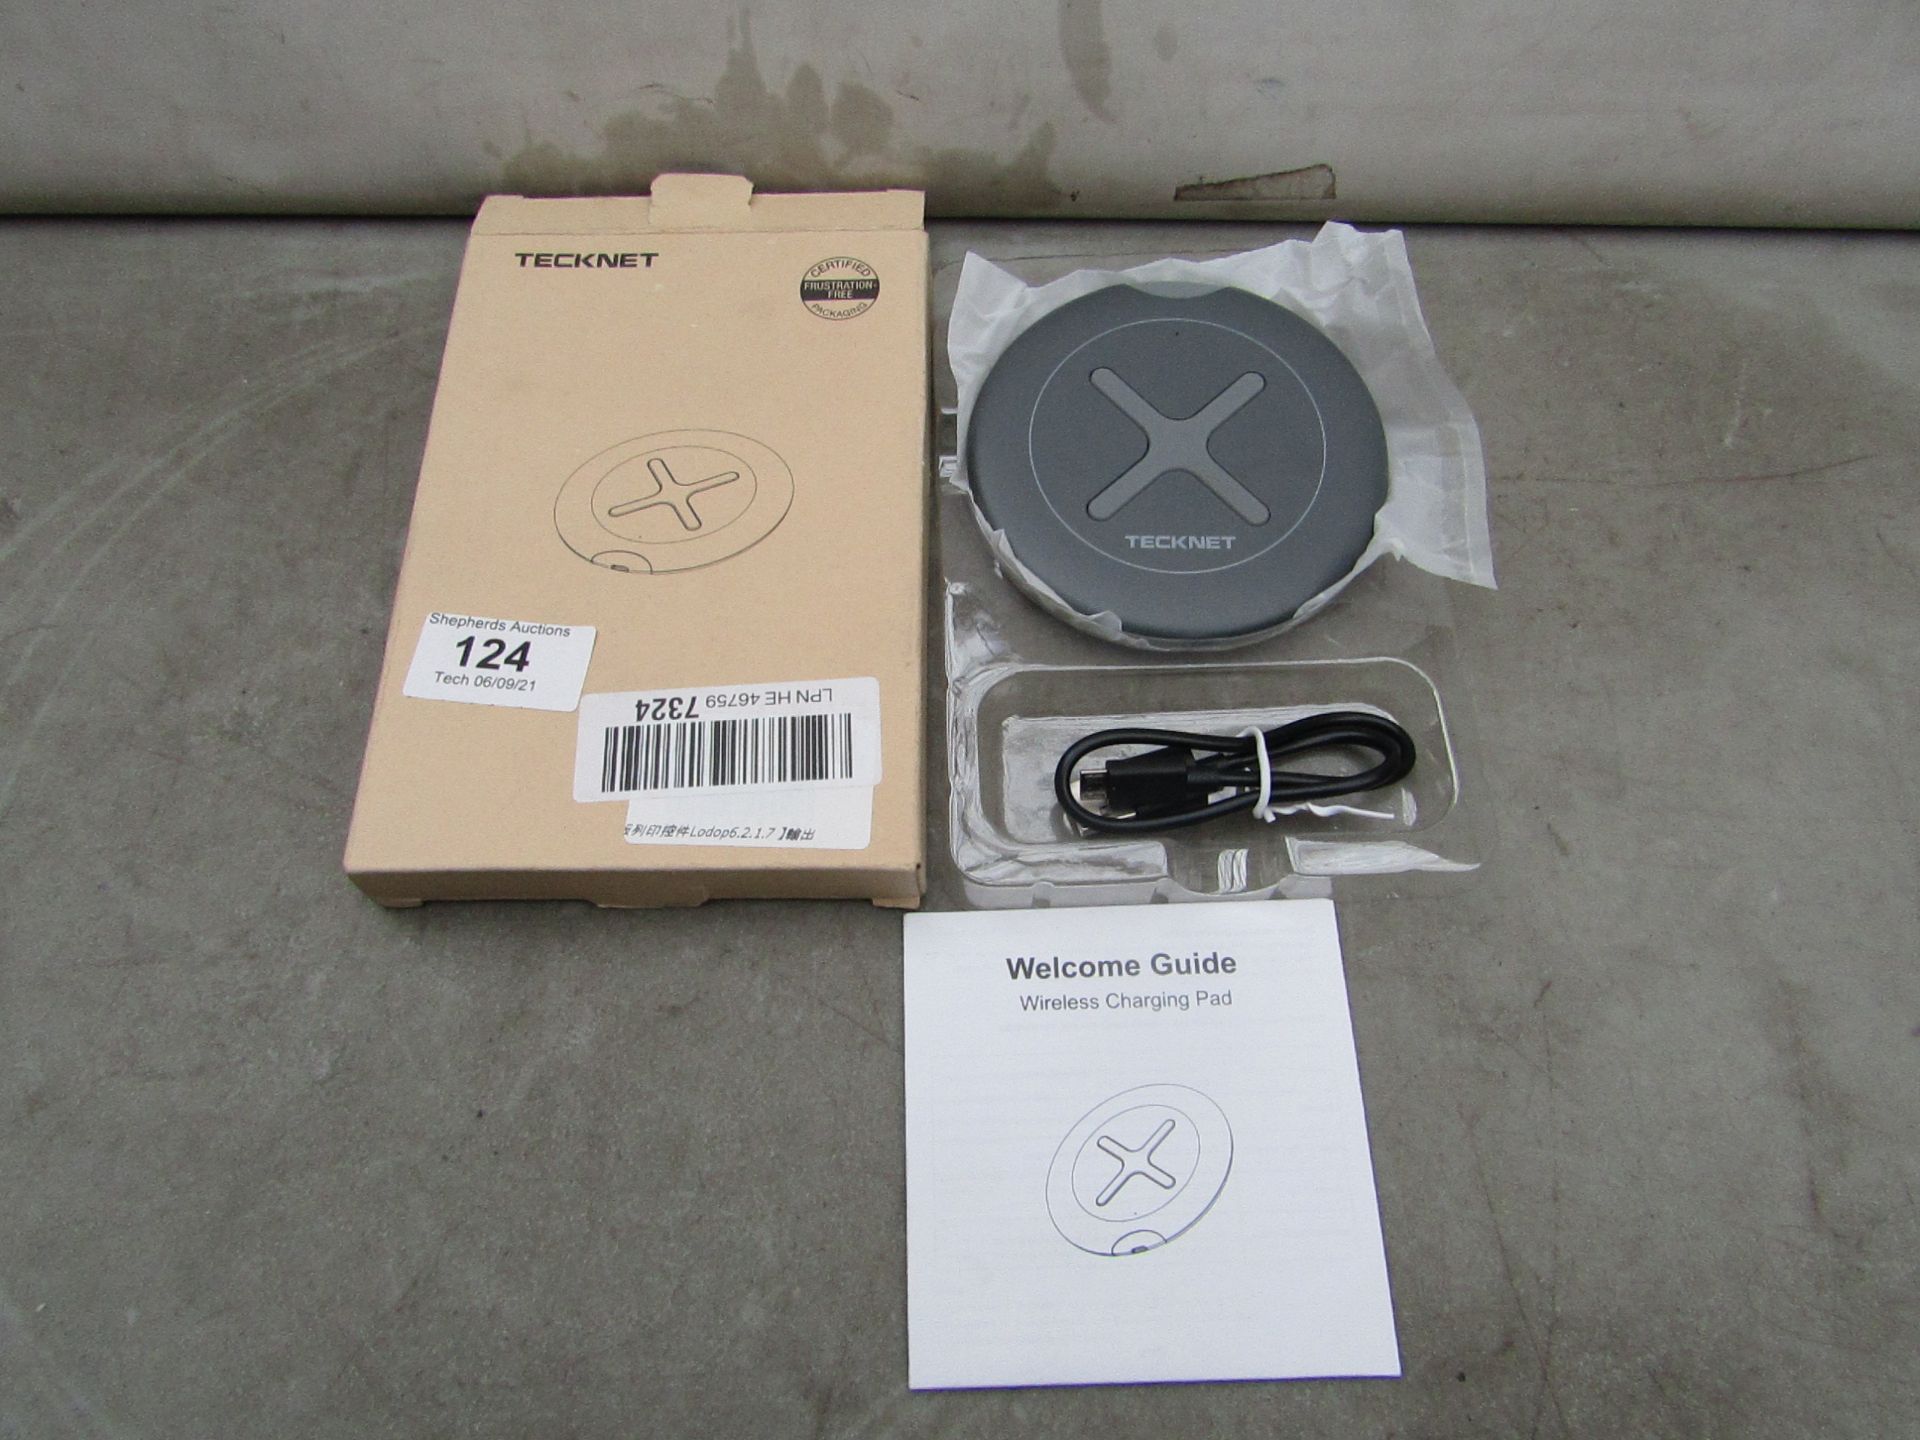 Tecknet wireless charging pad, new and boxed.